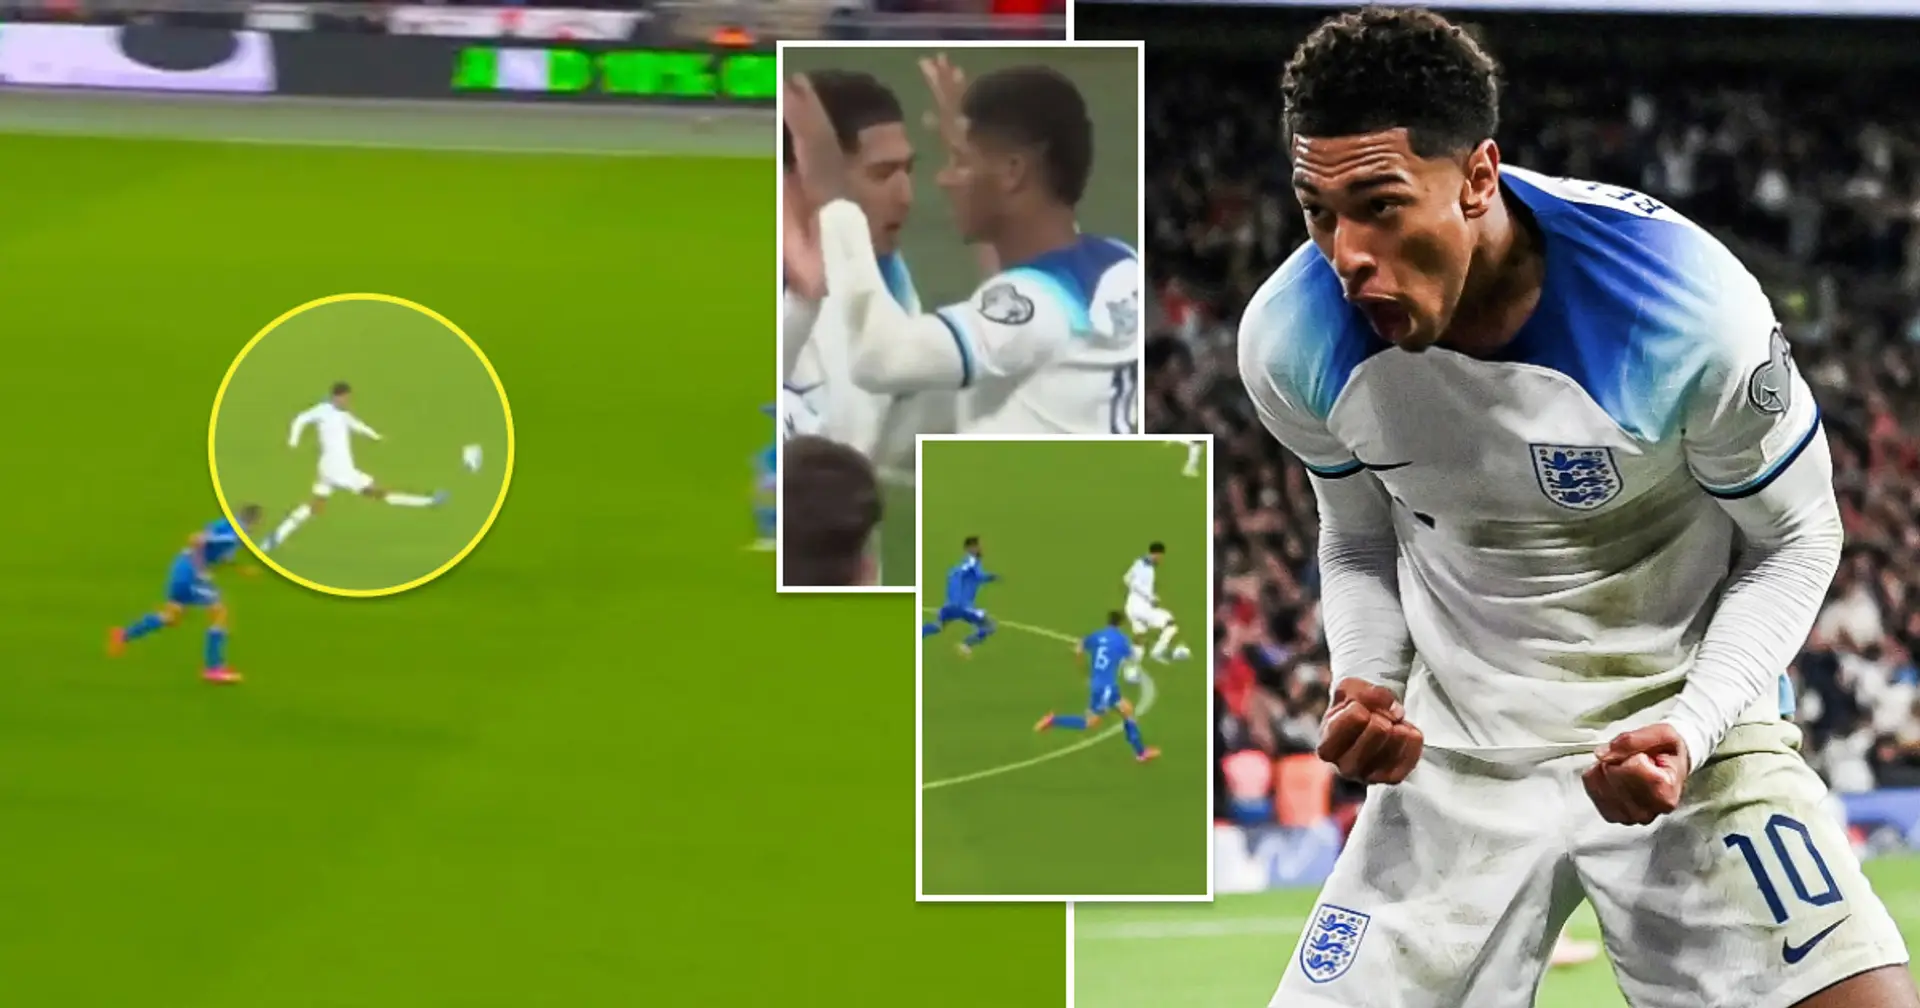 Spotted: Bellingham sets Rashford up for goal v Italy with RIDICULOUS RUN — not bad for someone who only scores tap-ins